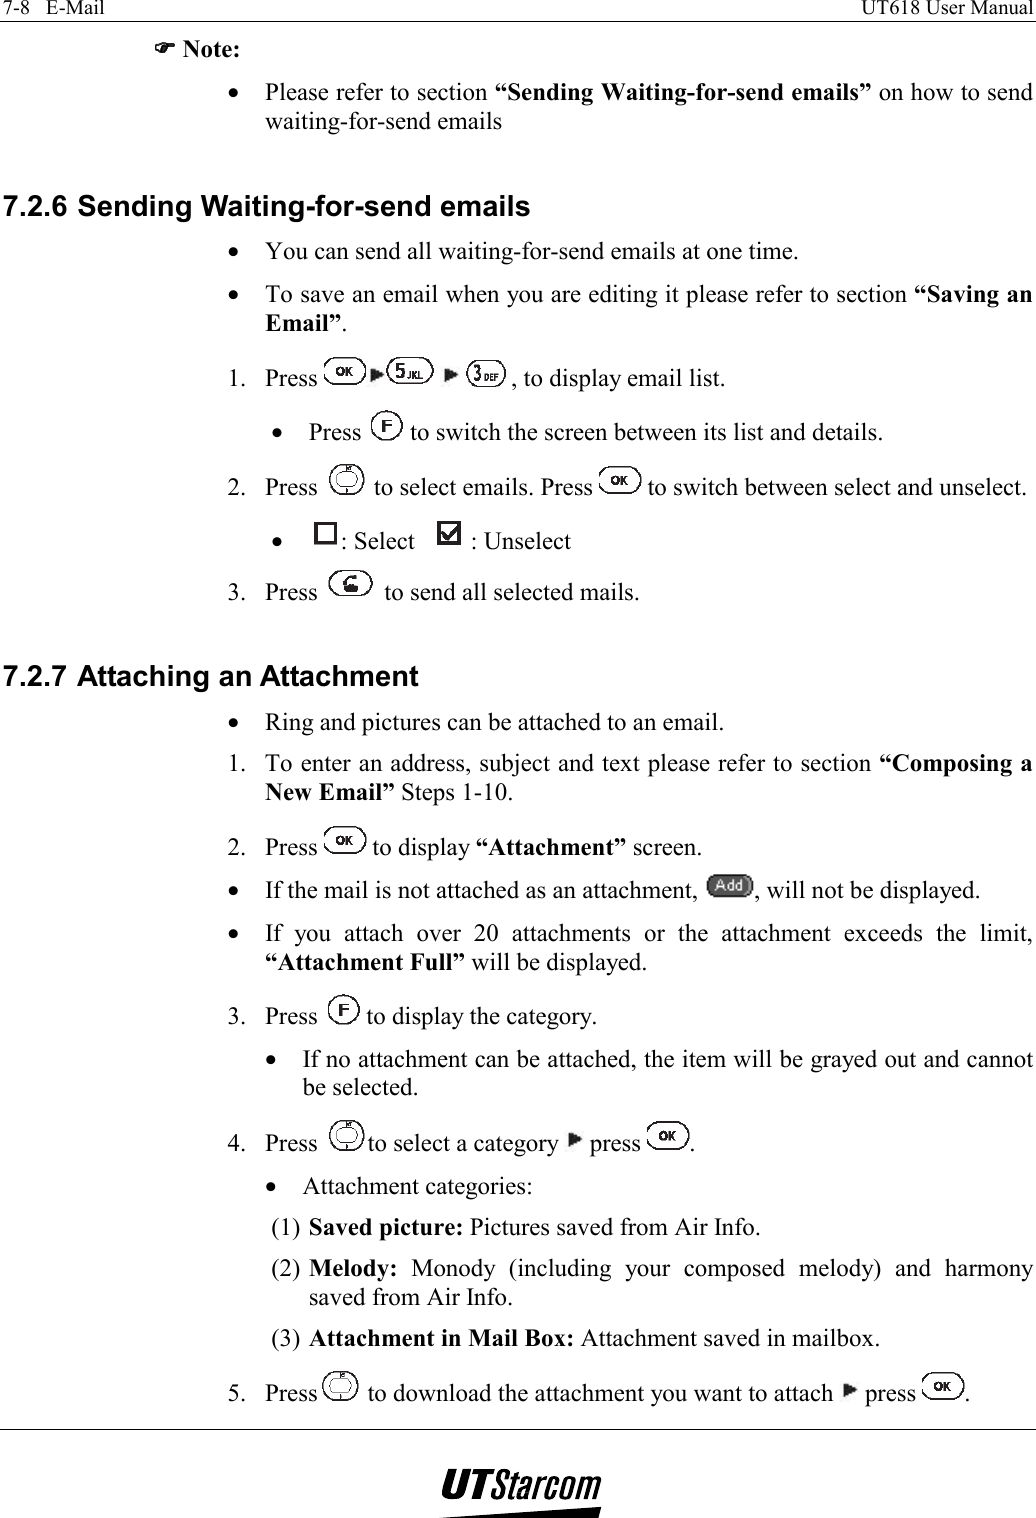 7-8   E-Mail    UT618 User Manual   )))) Note: •  Please refer to section “Sending Waiting-for-send emails” on how to send waiting-for-send emails  7.2.6 Sending Waiting-for-send emails •  You can send all waiting-for-send emails at one time. •  To save an email when you are editing it please refer to section “Saving an Email”. 1. Press      , to display email list. •  Press   to switch the screen between its list and details. 2. Press   to select emails. Press   to switch between select and unselect. •  : Select  : Unselect 3. Press   to send all selected mails.  7.2.7 Attaching an Attachment •  Ring and pictures can be attached to an email. 1.  To enter an address, subject and text please refer to section “Composing a New Email” Steps 1-10. 2. Press   to display “Attachment” screen. •  If the mail is not attached as an attachment,  , will not be displayed. •  If you attach over 20 attachments or the attachment exceeds the limit, “Attachment Full” will be displayed. 3. Press   to display the category. •  If no attachment can be attached, the item will be grayed out and cannot be selected. 4. Press  to select a category   press  . •  Attachment categories: (1) Saved picture: Pictures saved from Air Info. (2) Melody: Monody (including your composed melody) and harmony saved from Air Info. (3) Attachment in Mail Box: Attachment saved in mailbox. 5. Press  to download the attachment you want to attach   press  . 